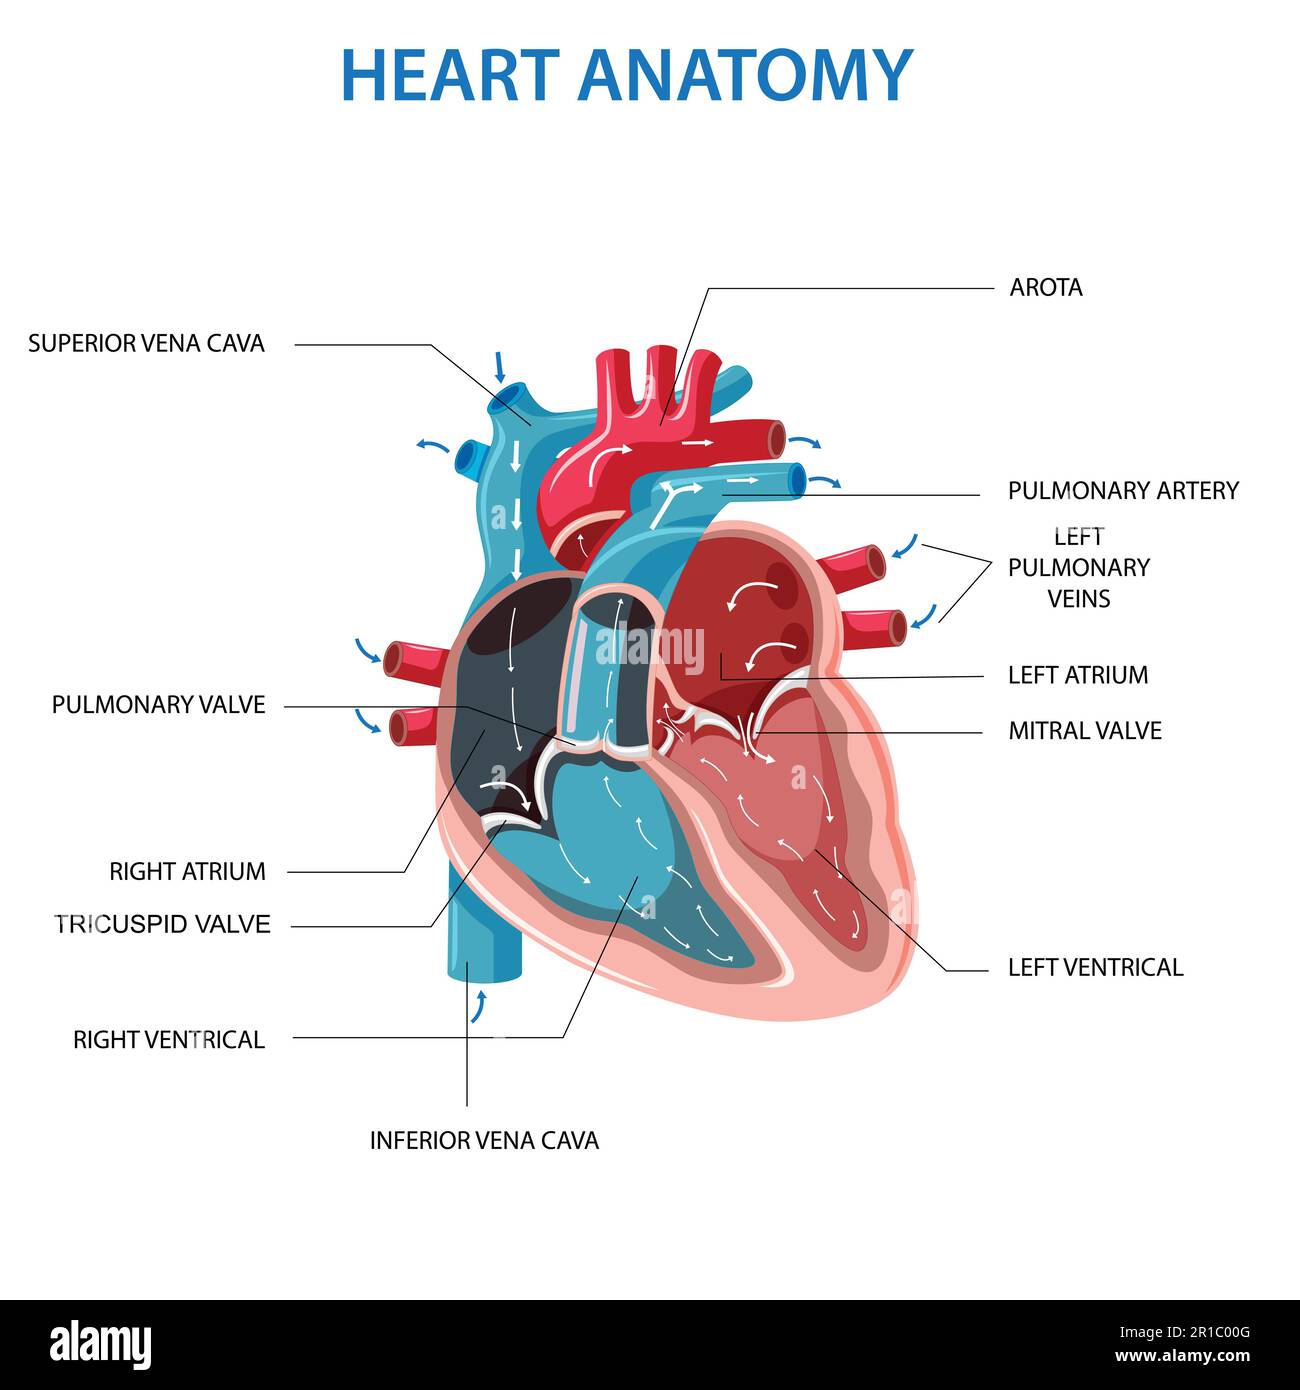 Anatomy of the human heart. Cross sectional diagram of the heart with main parts labeled. Human heart diagram Vector illustration. Educational diagram Stock Vector